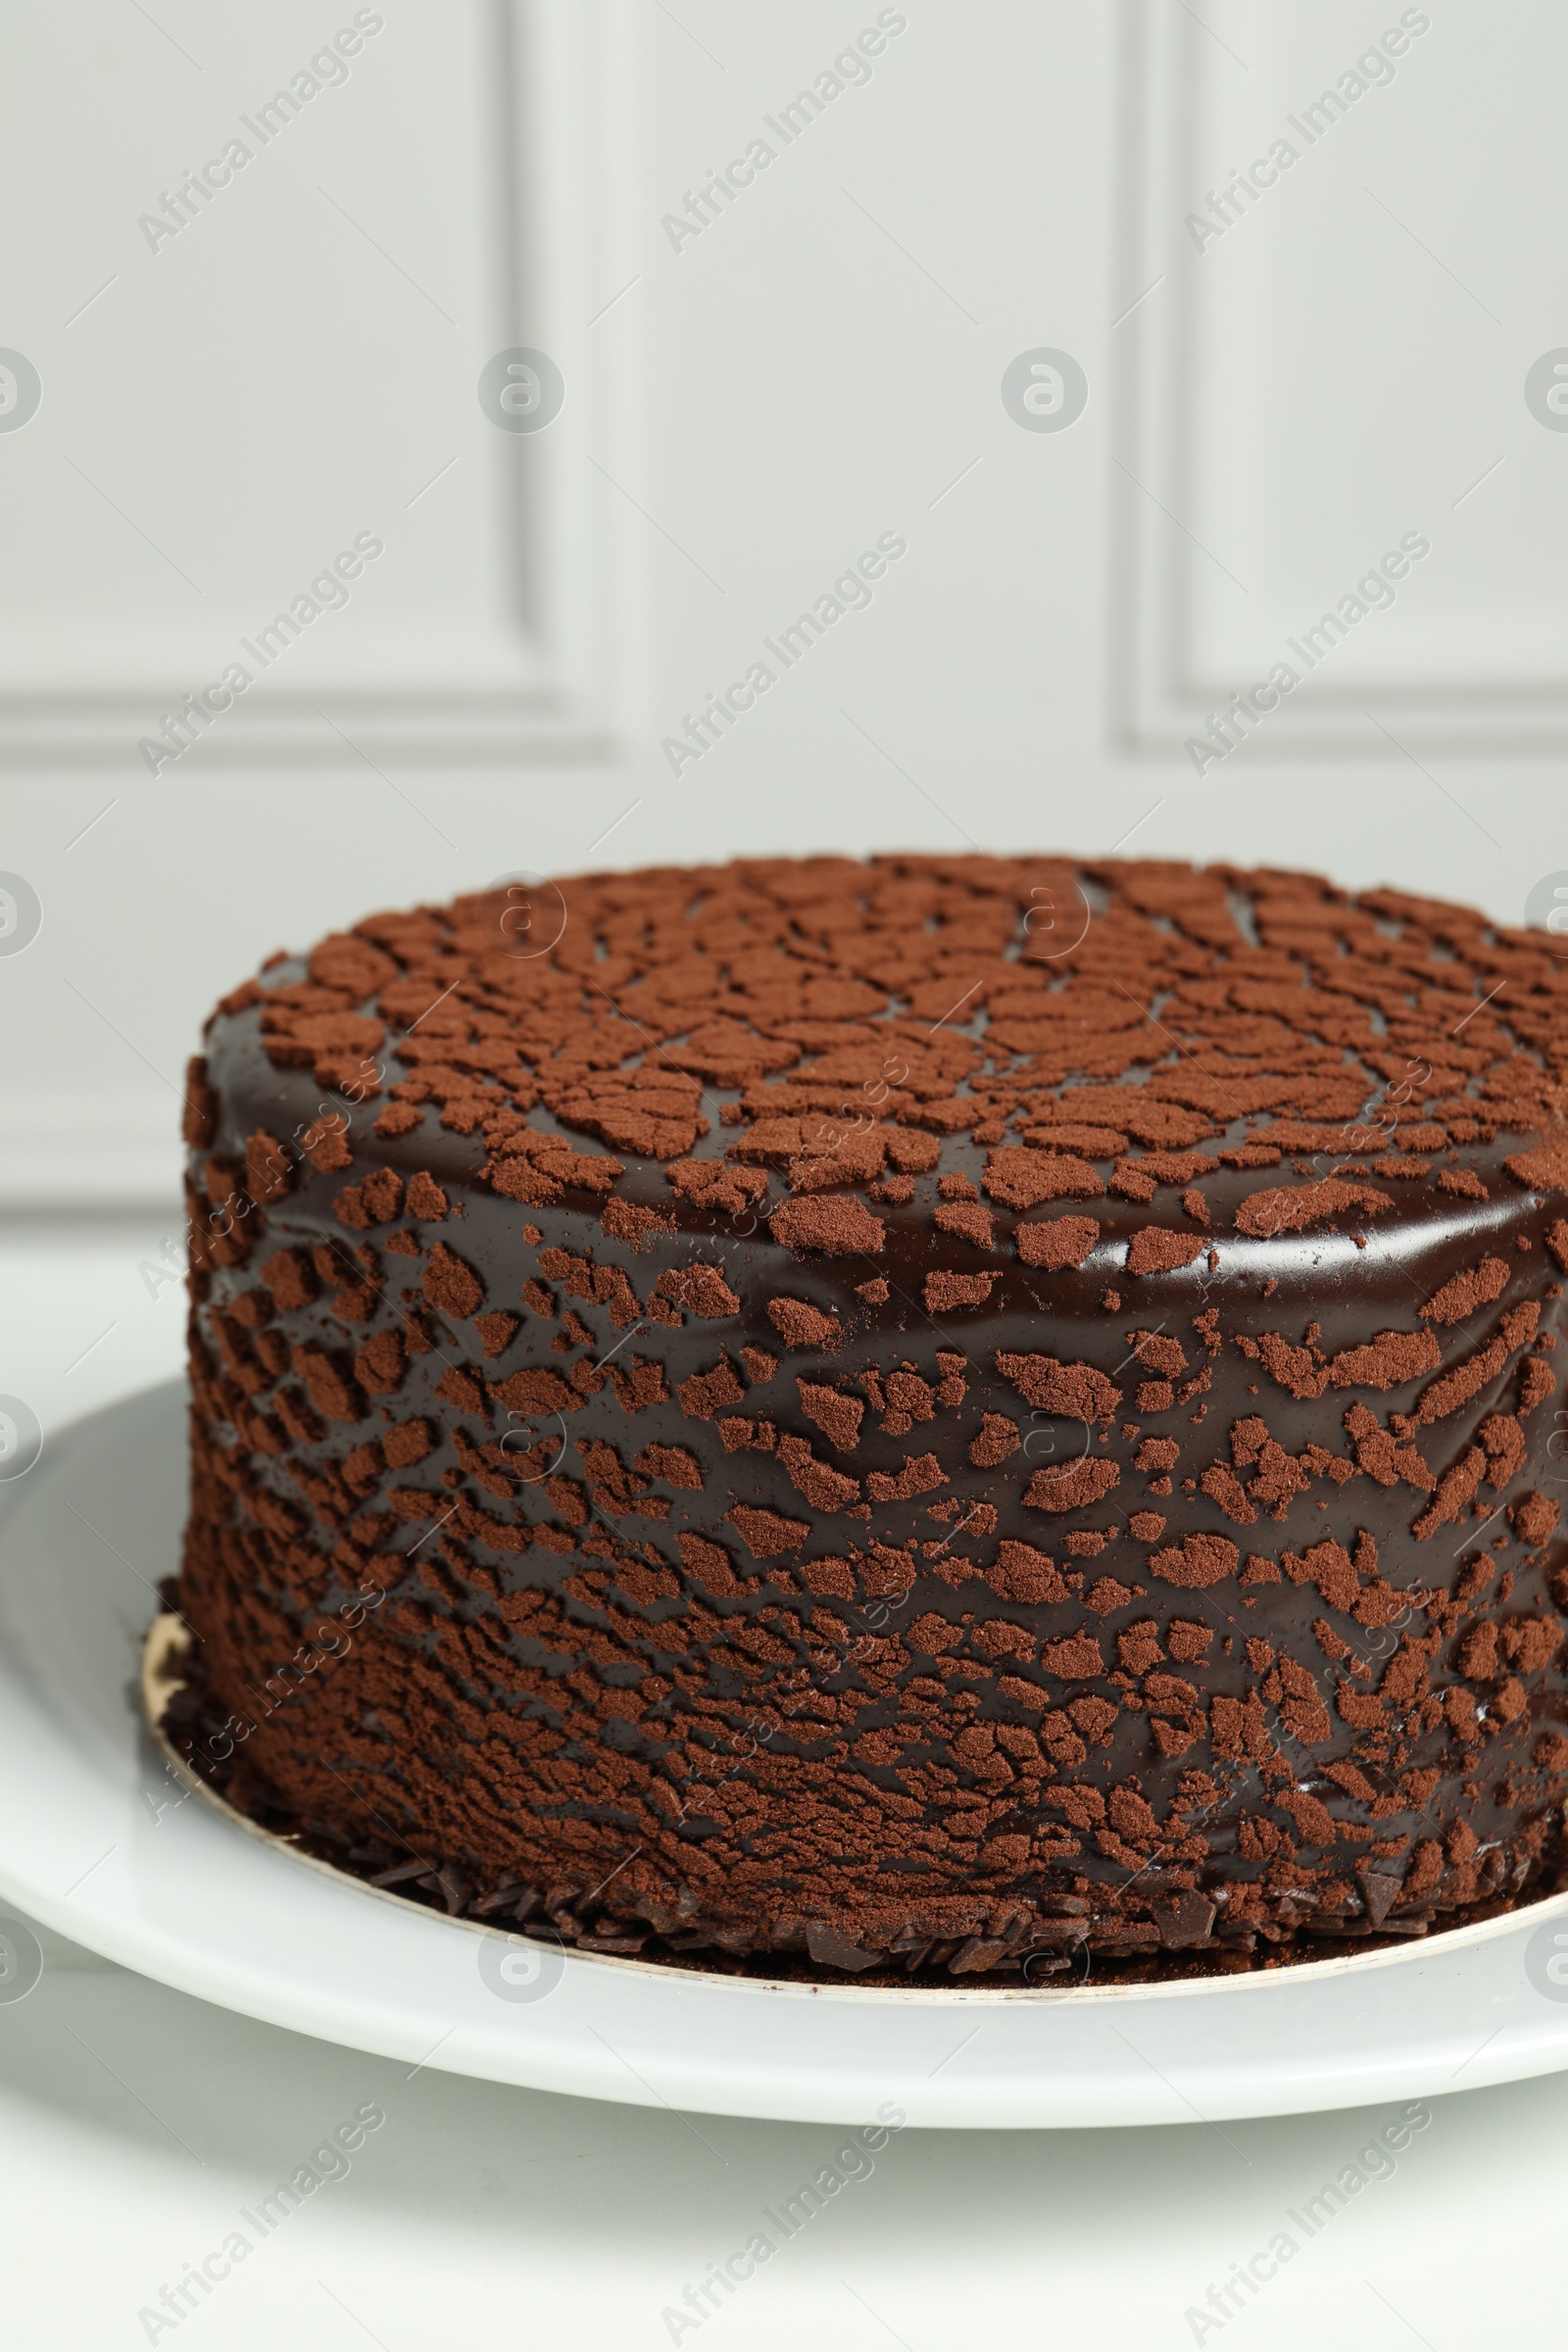 Photo of Delicious chocolate truffle cake on white table